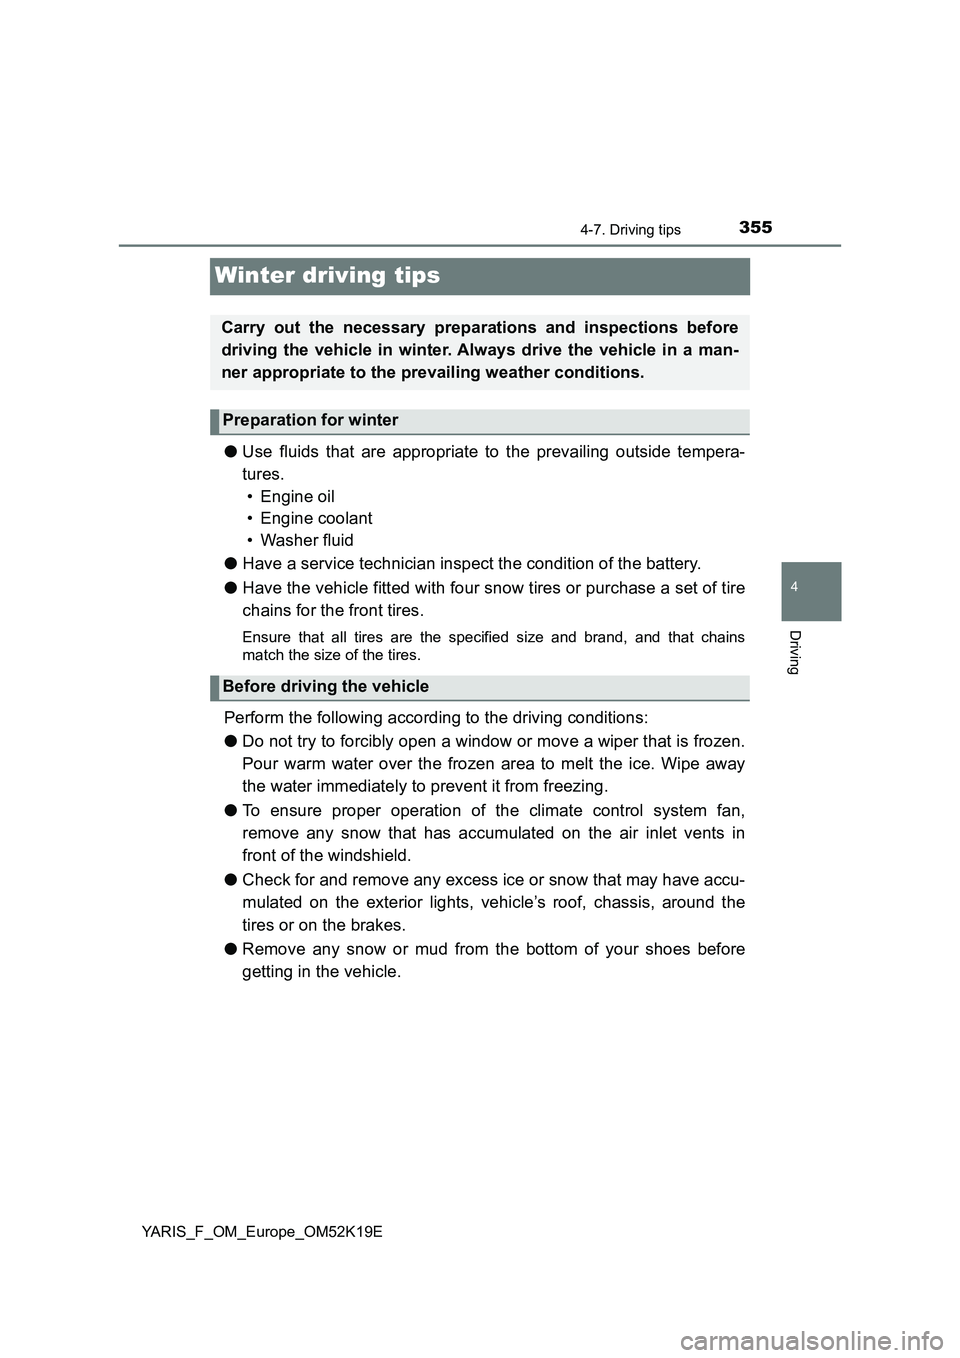 TOYOTA YARIS 2019  Owners Manual 355
4
4-7. Driving tips
Driving
YARIS_F_OM_Europe_OM52K19E
Winter driving tips
●Use fluids that are appropriate to the prevailing outside tempera- 
tures. 
• Engine oil 
• Engine coolant 
• Wa